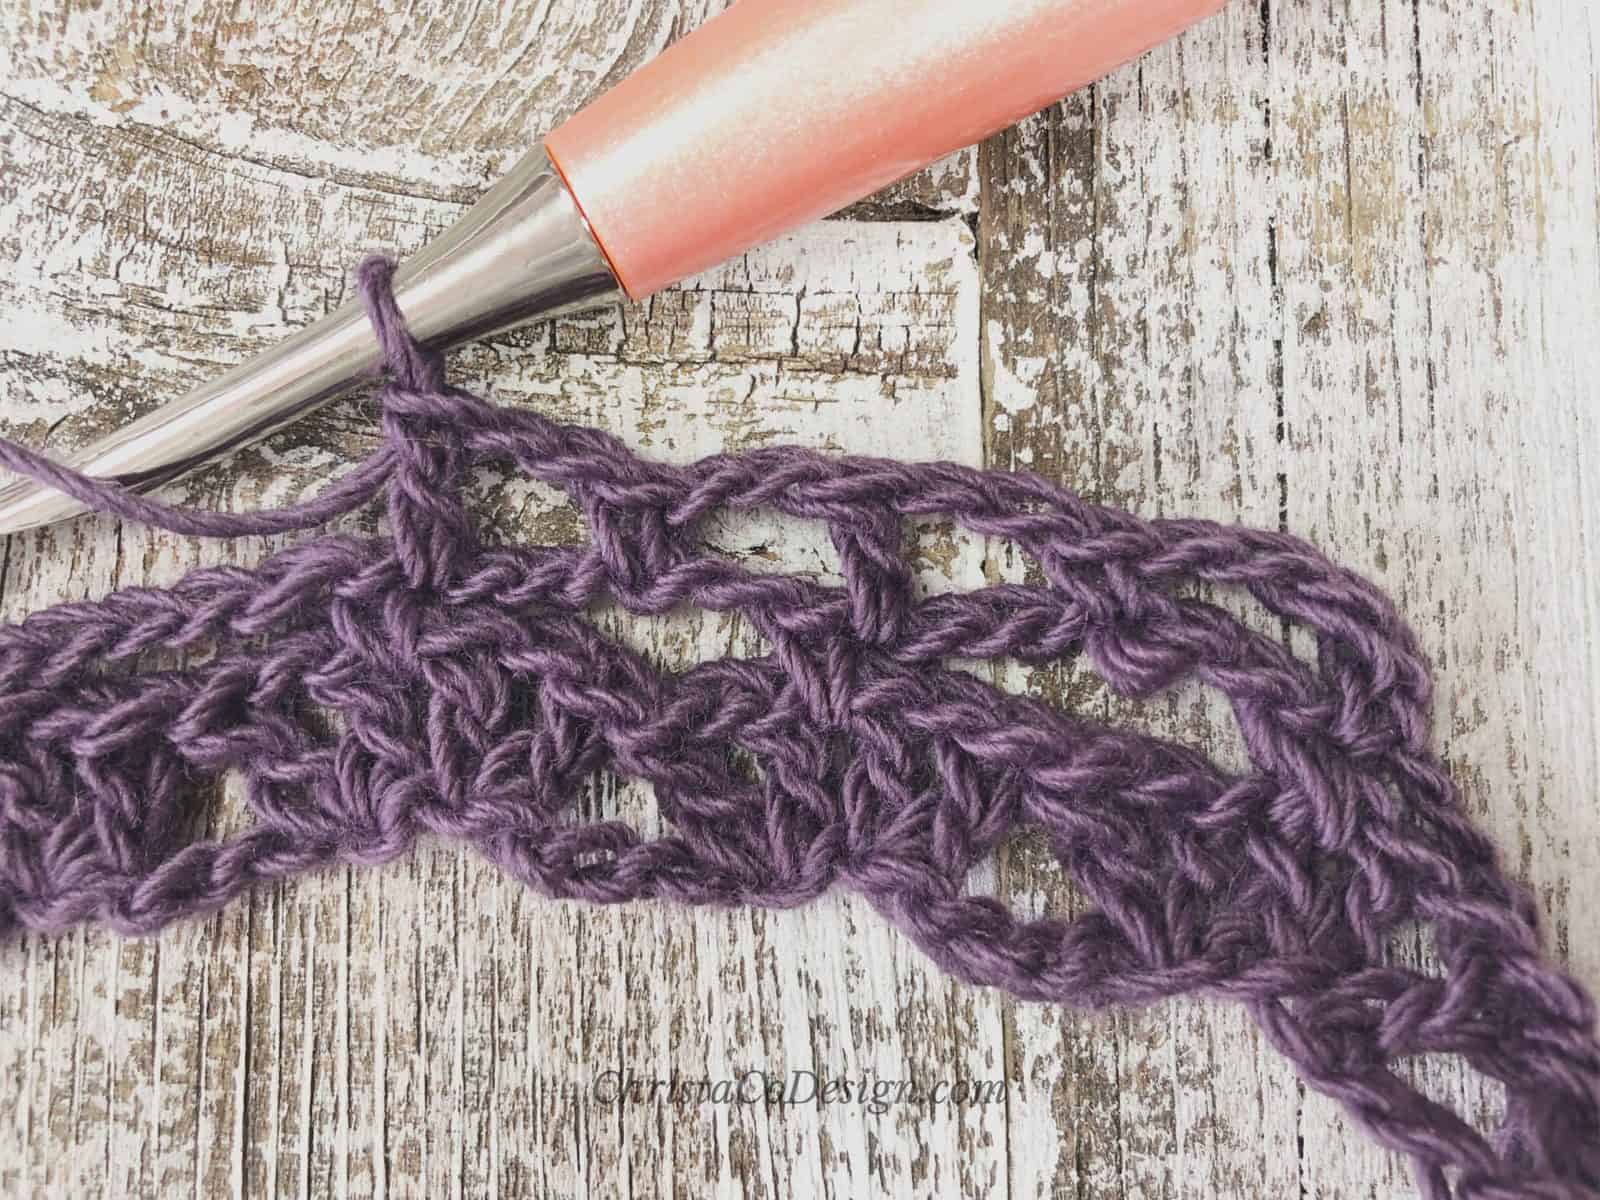 Alternating single crochet and double crochet between chains.